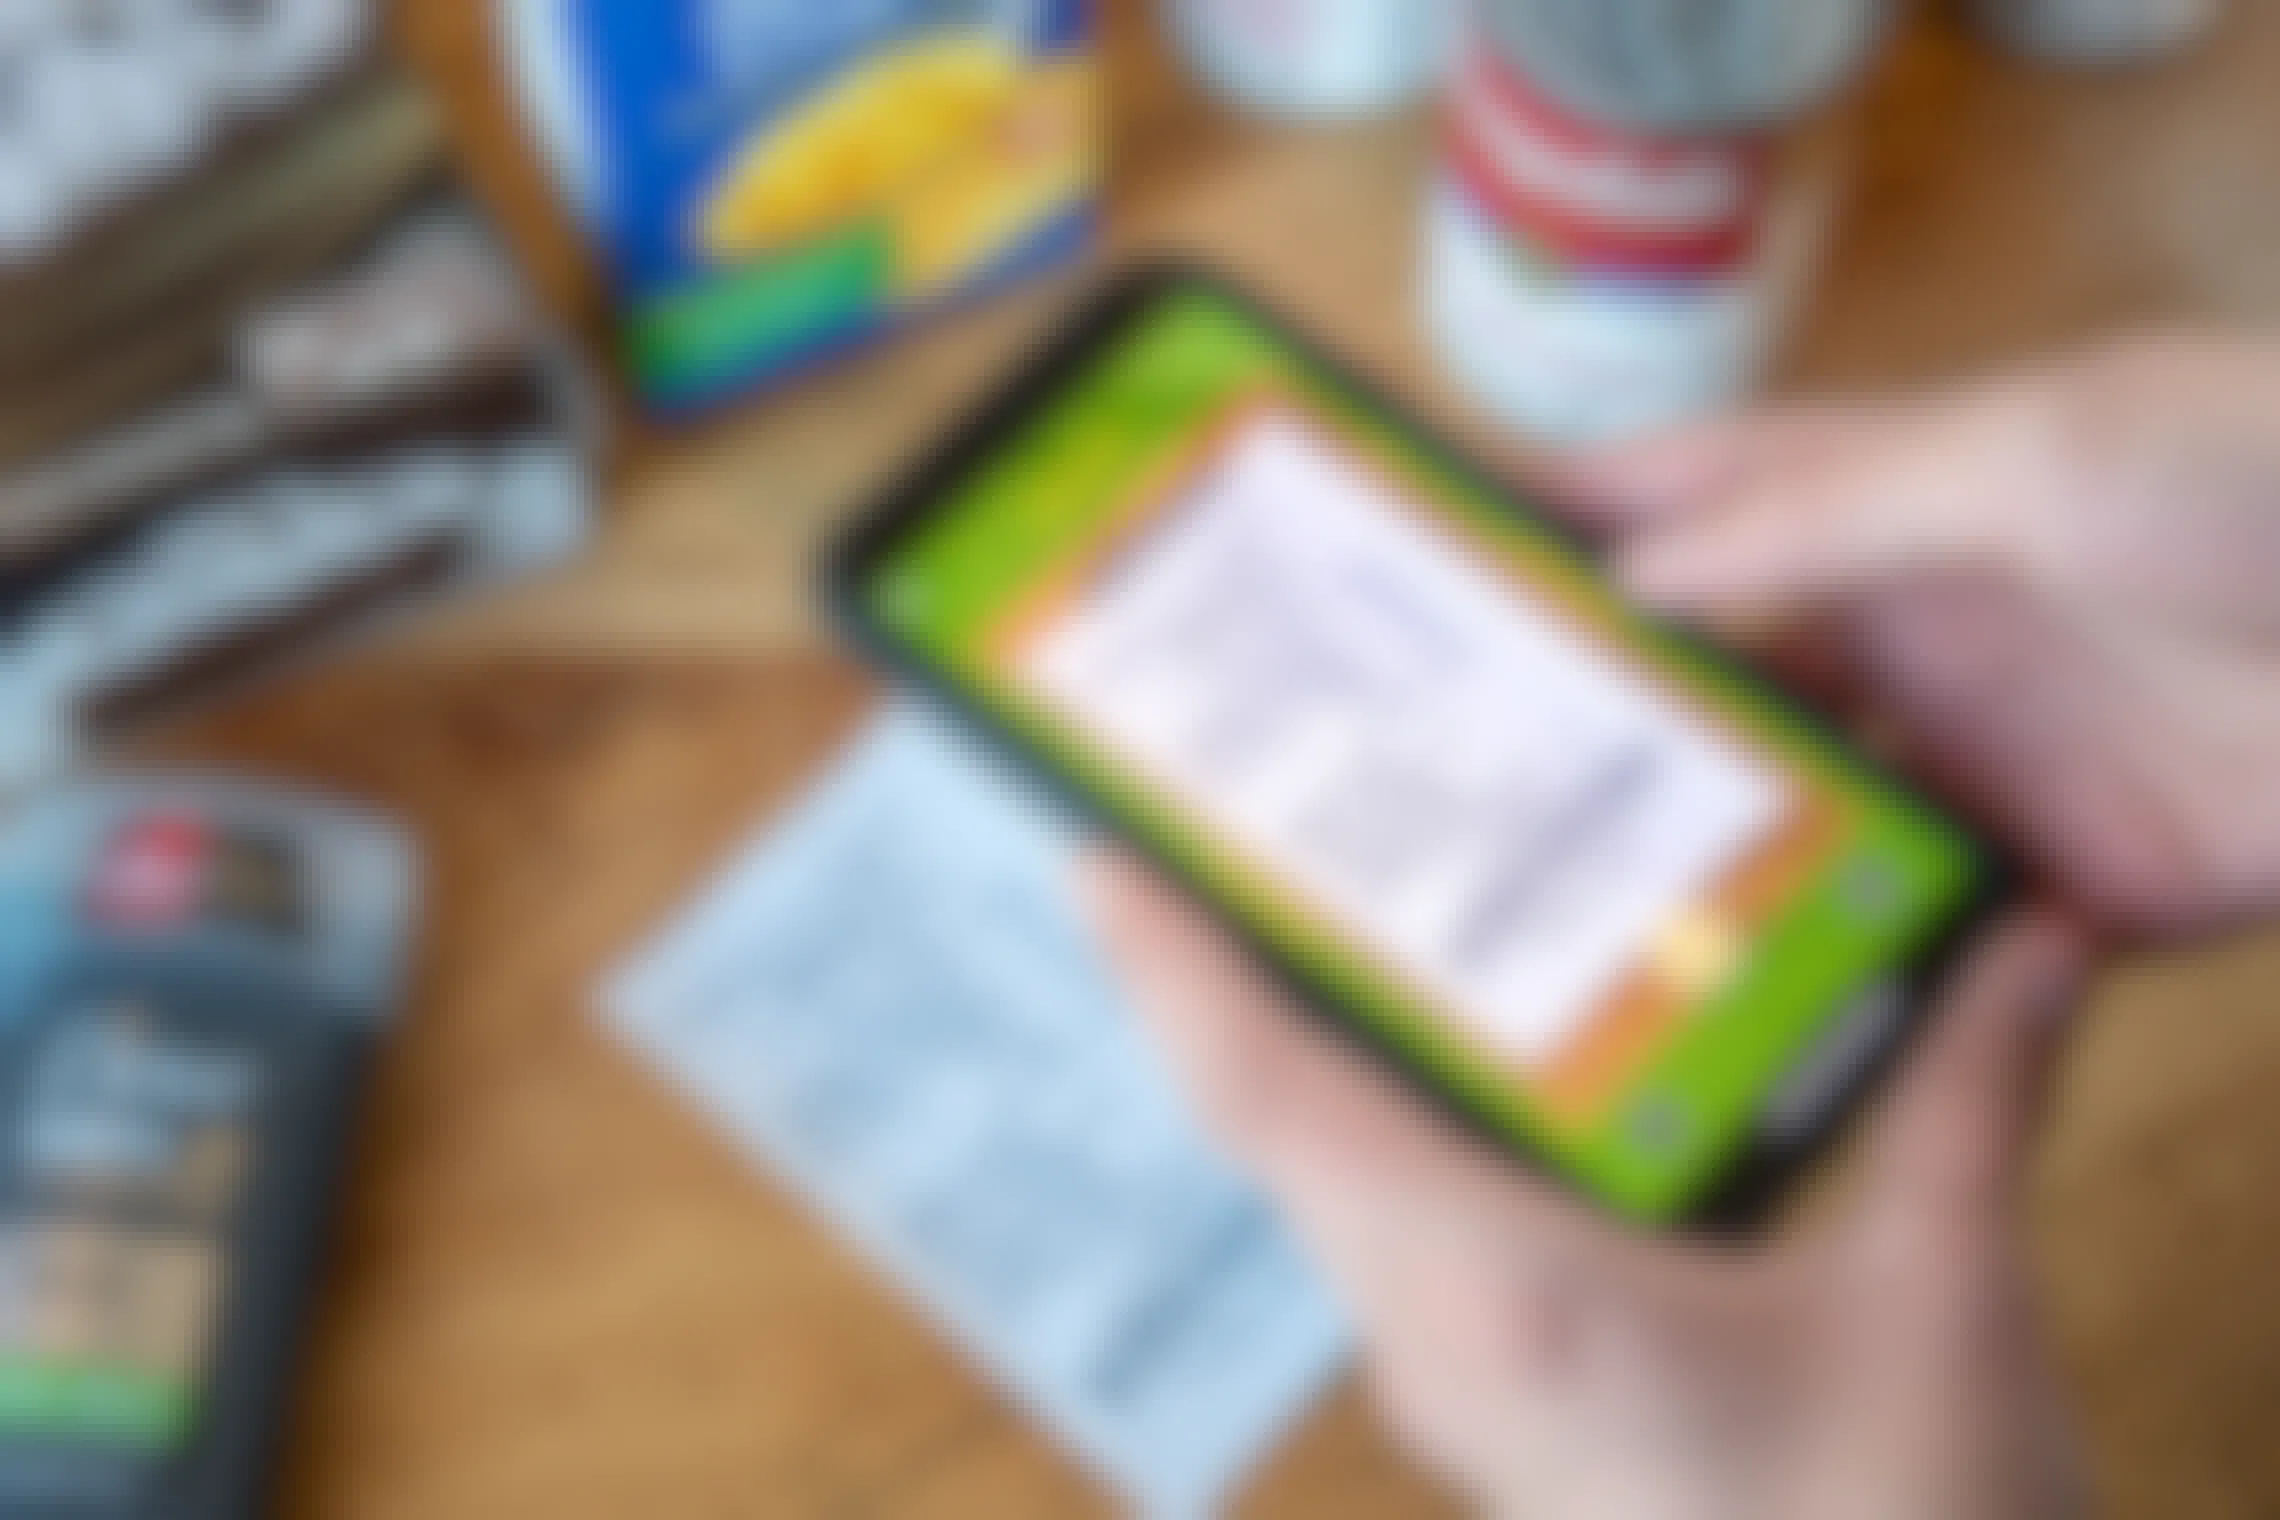 A person scanning a receipt into the Fetch Rewards app next to some grocery items on the table.